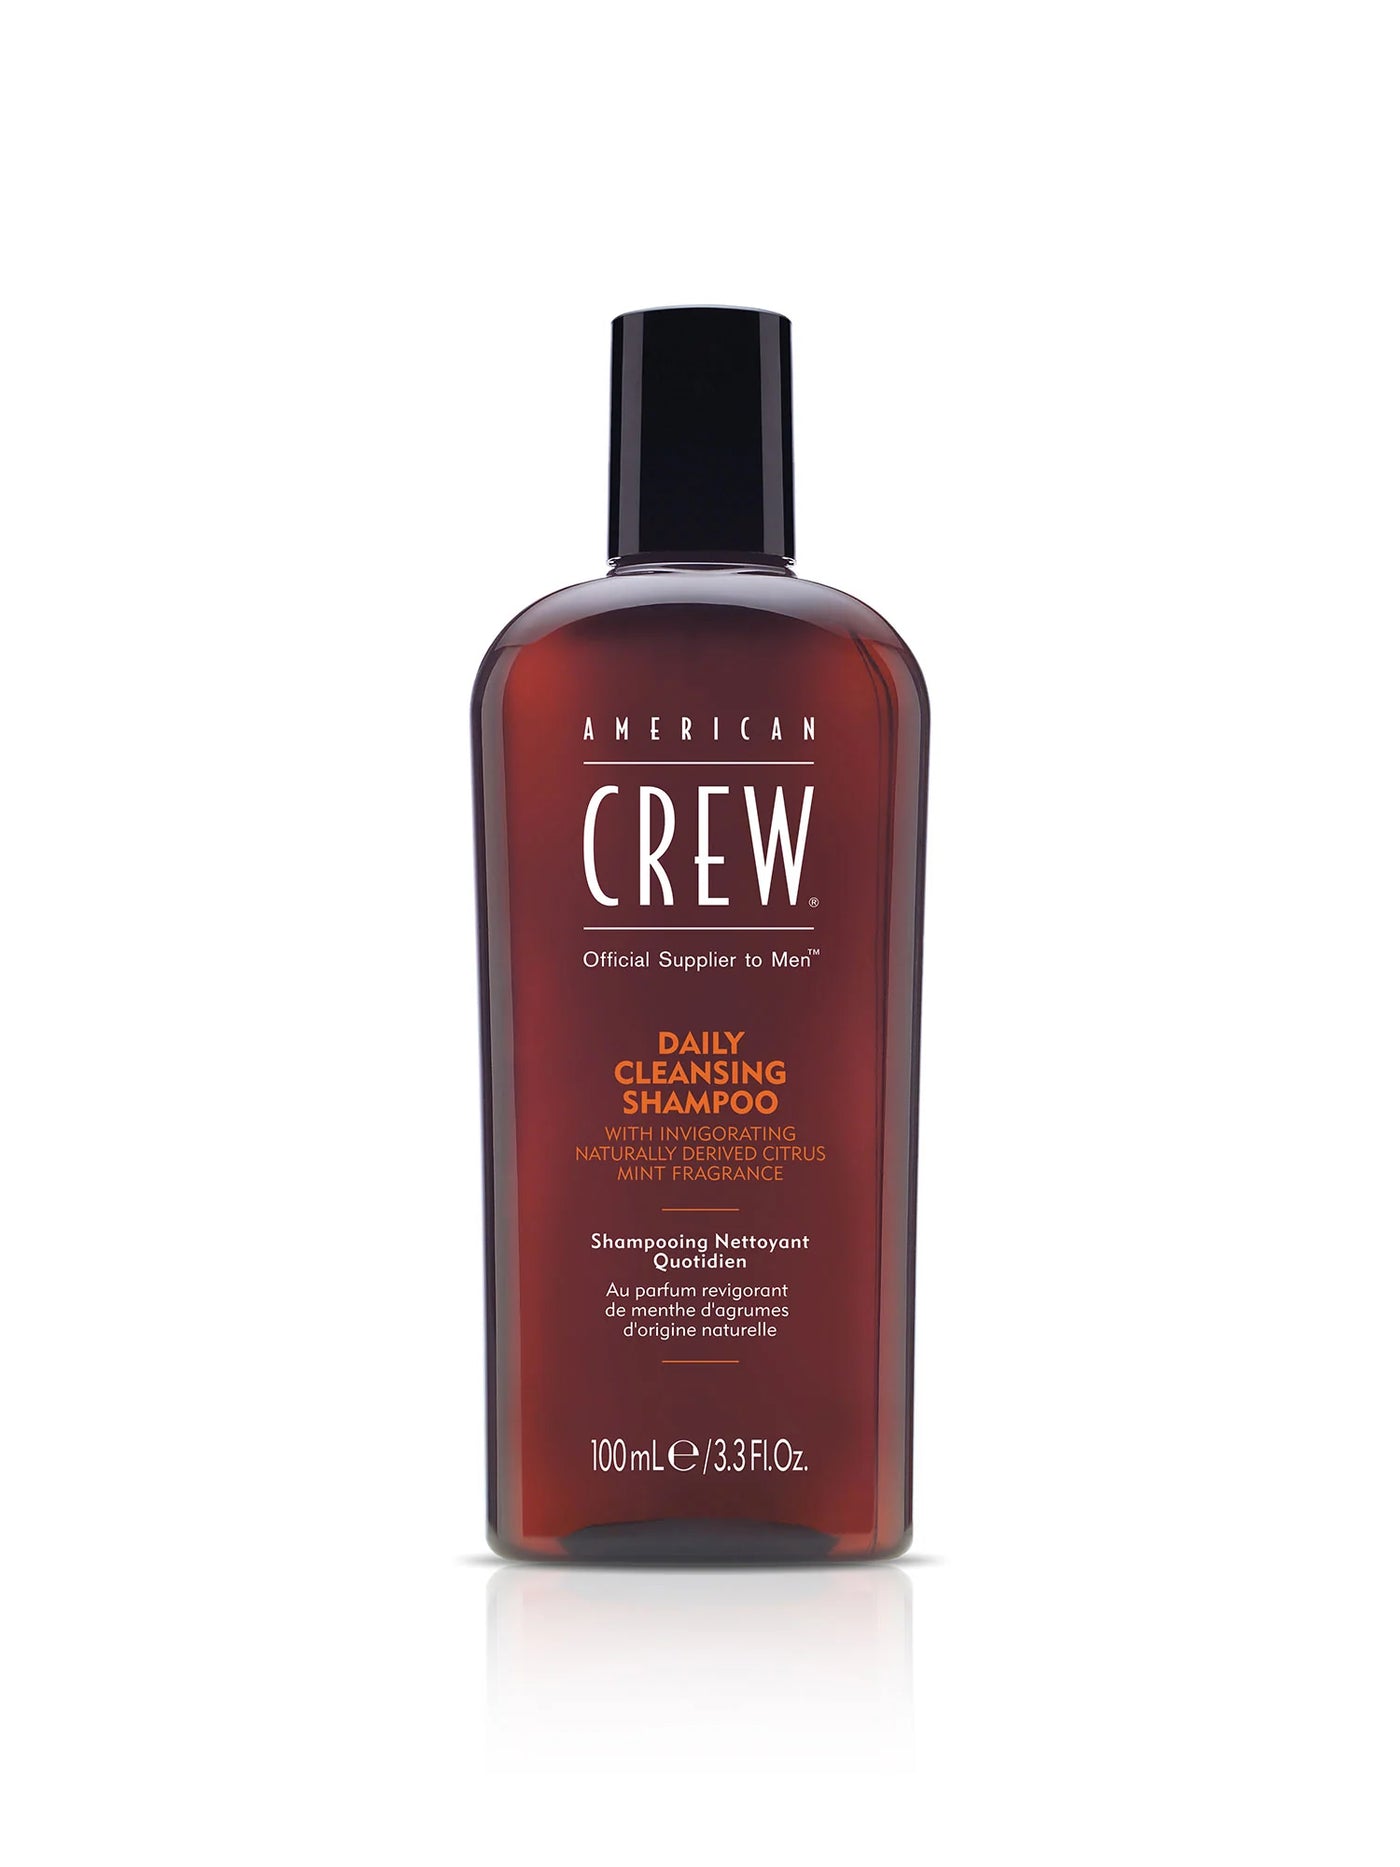 American Crew Daily Cleasing Shampoo